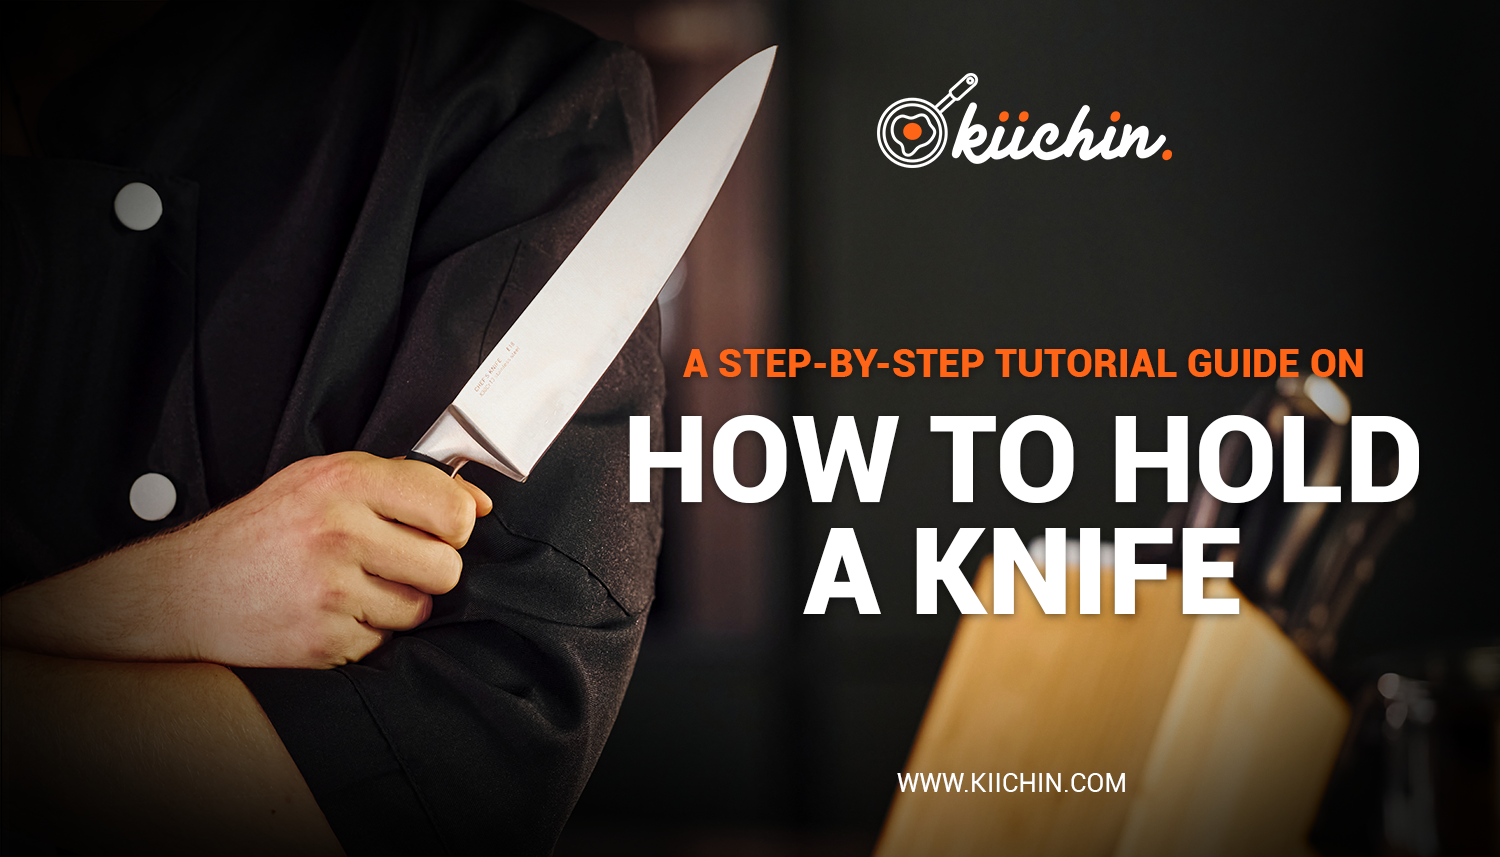 A Step-By-Step Tutorial Guide On How To Hold A Knife